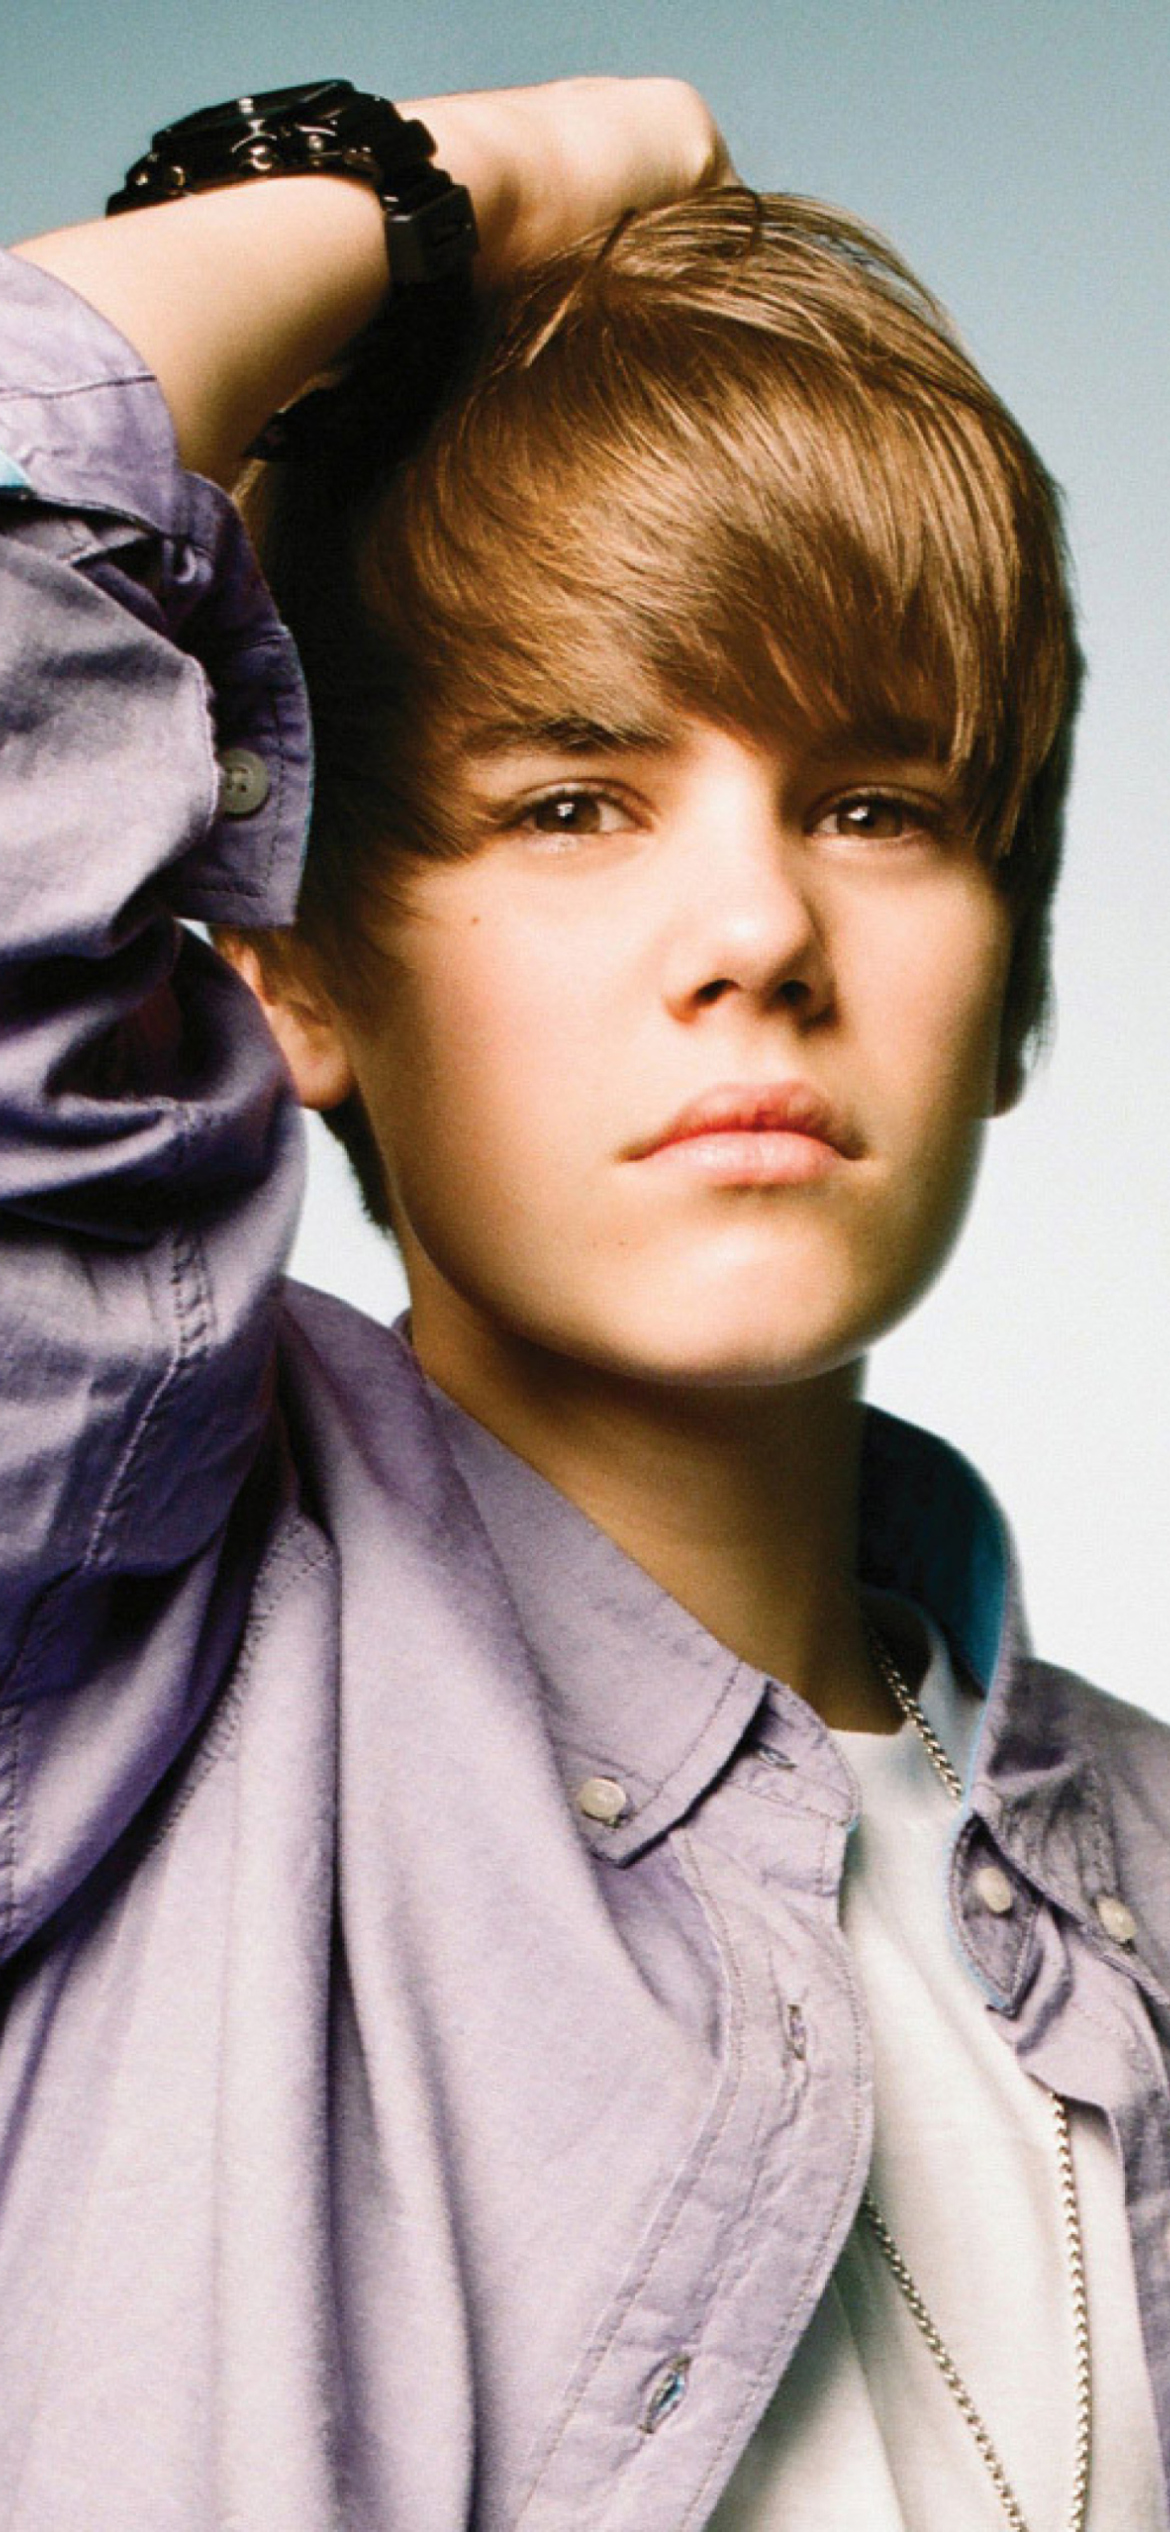 Justin Bieber Wallpaper For Iphone 12 Pro